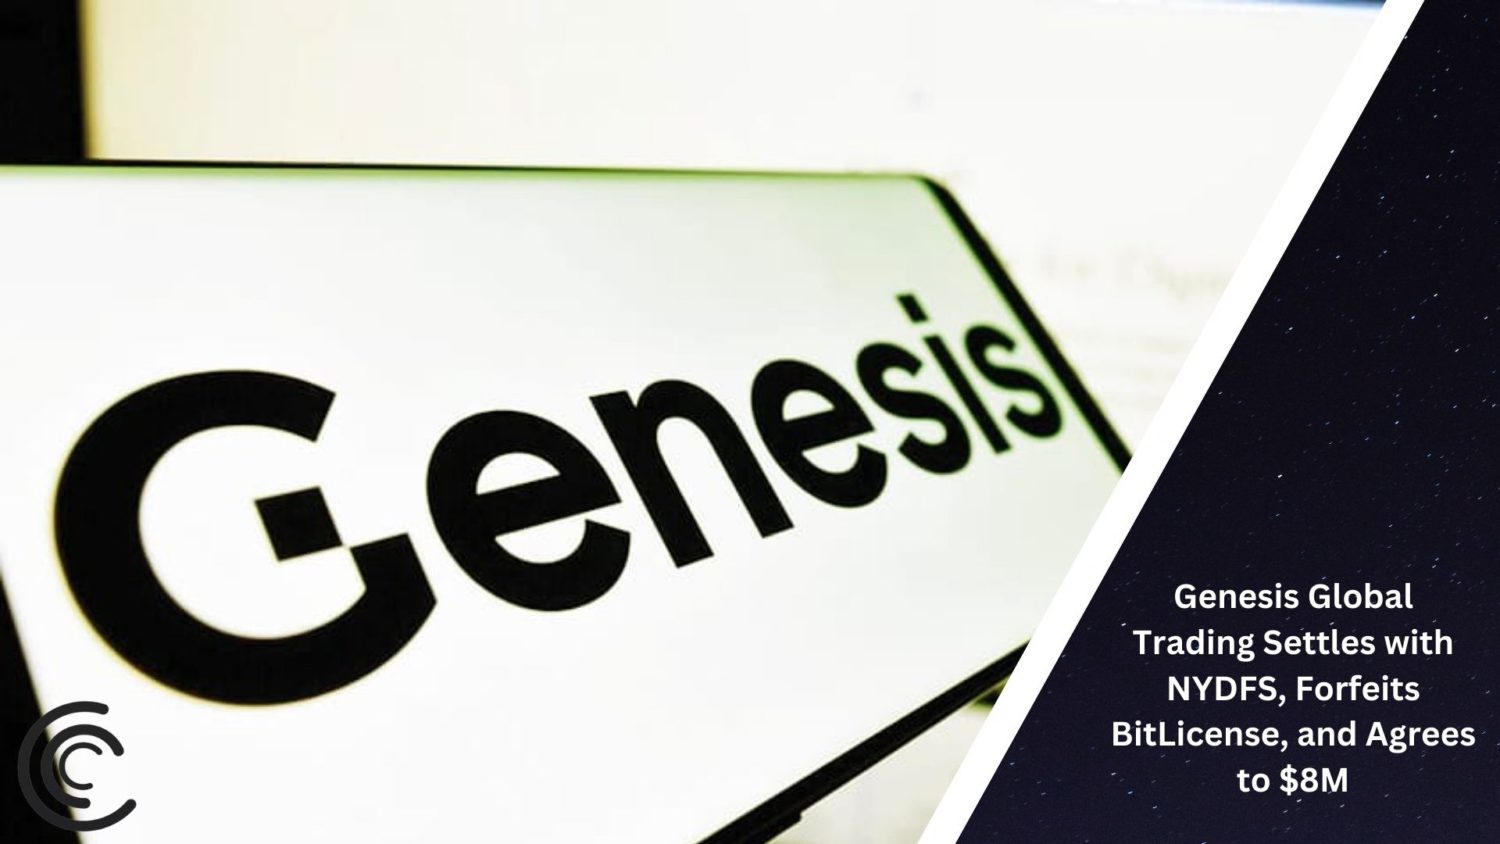 Genesis Global Trading Settles With Nydfs, Forfeits Bitlicense, And Agrees To $8M